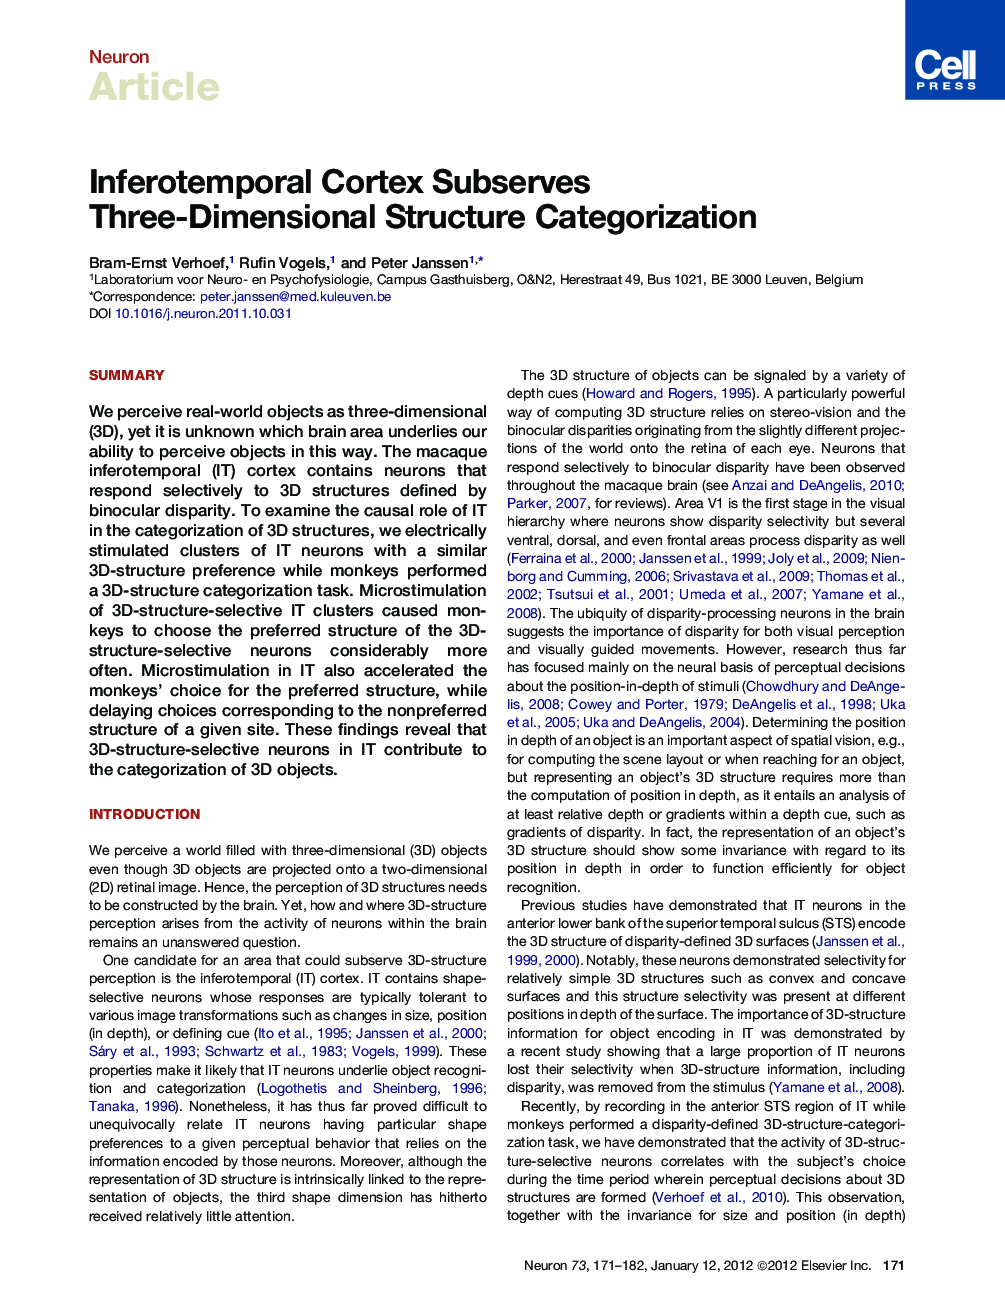 Inferotemporal Cortex Subserves Three-Dimensional Structure Categorization